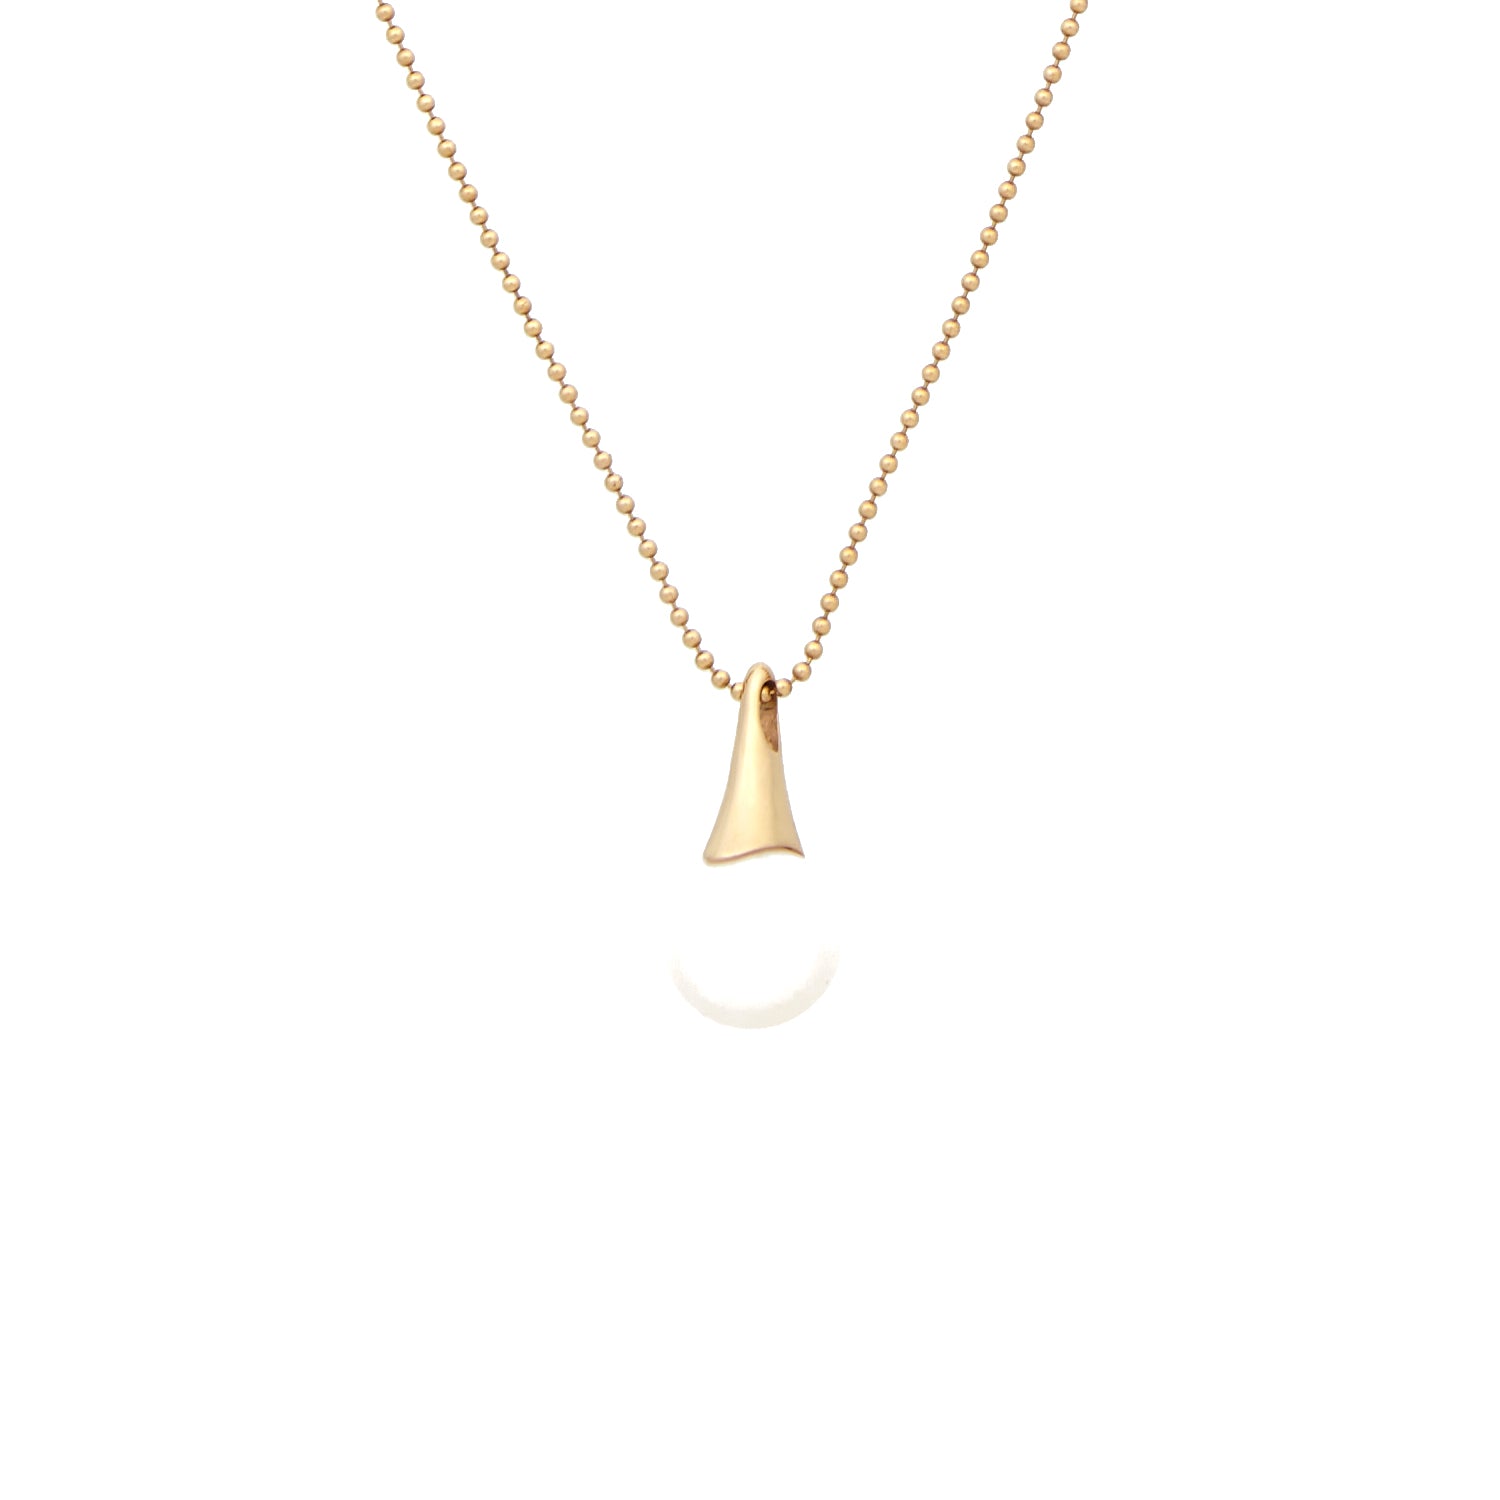 ROSE GOLD NECKLACE WITH PEARL PENDANT